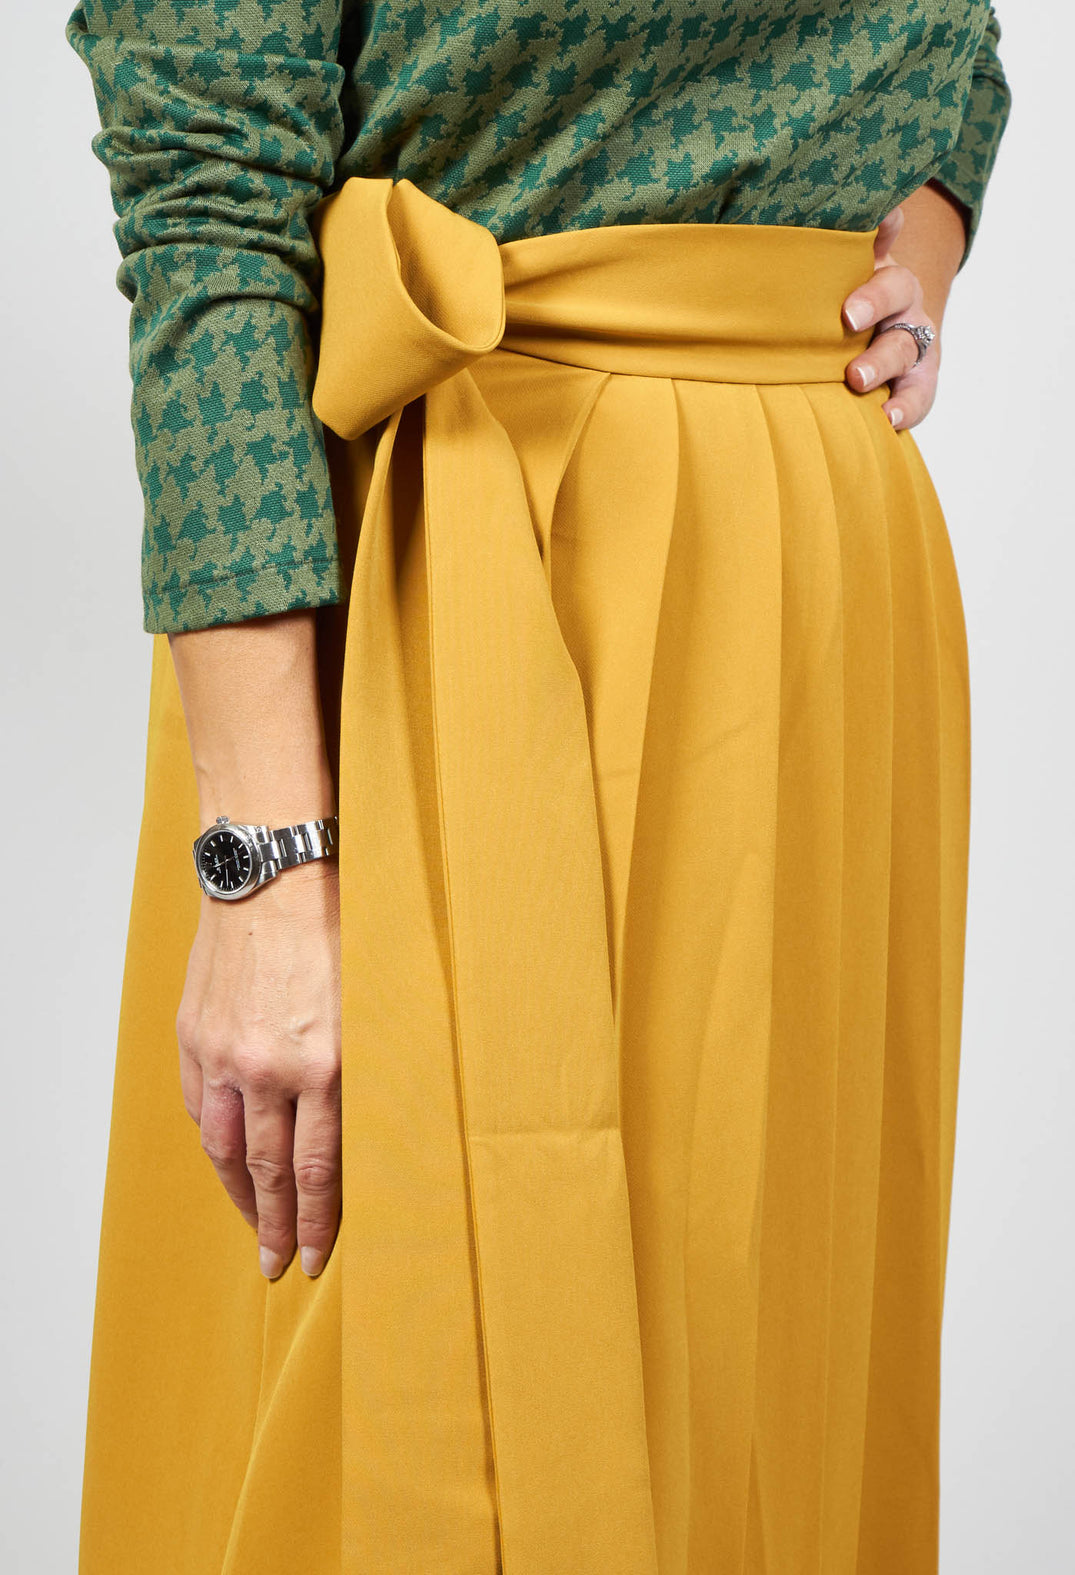 Pleated Skirt with Sash in Mustard